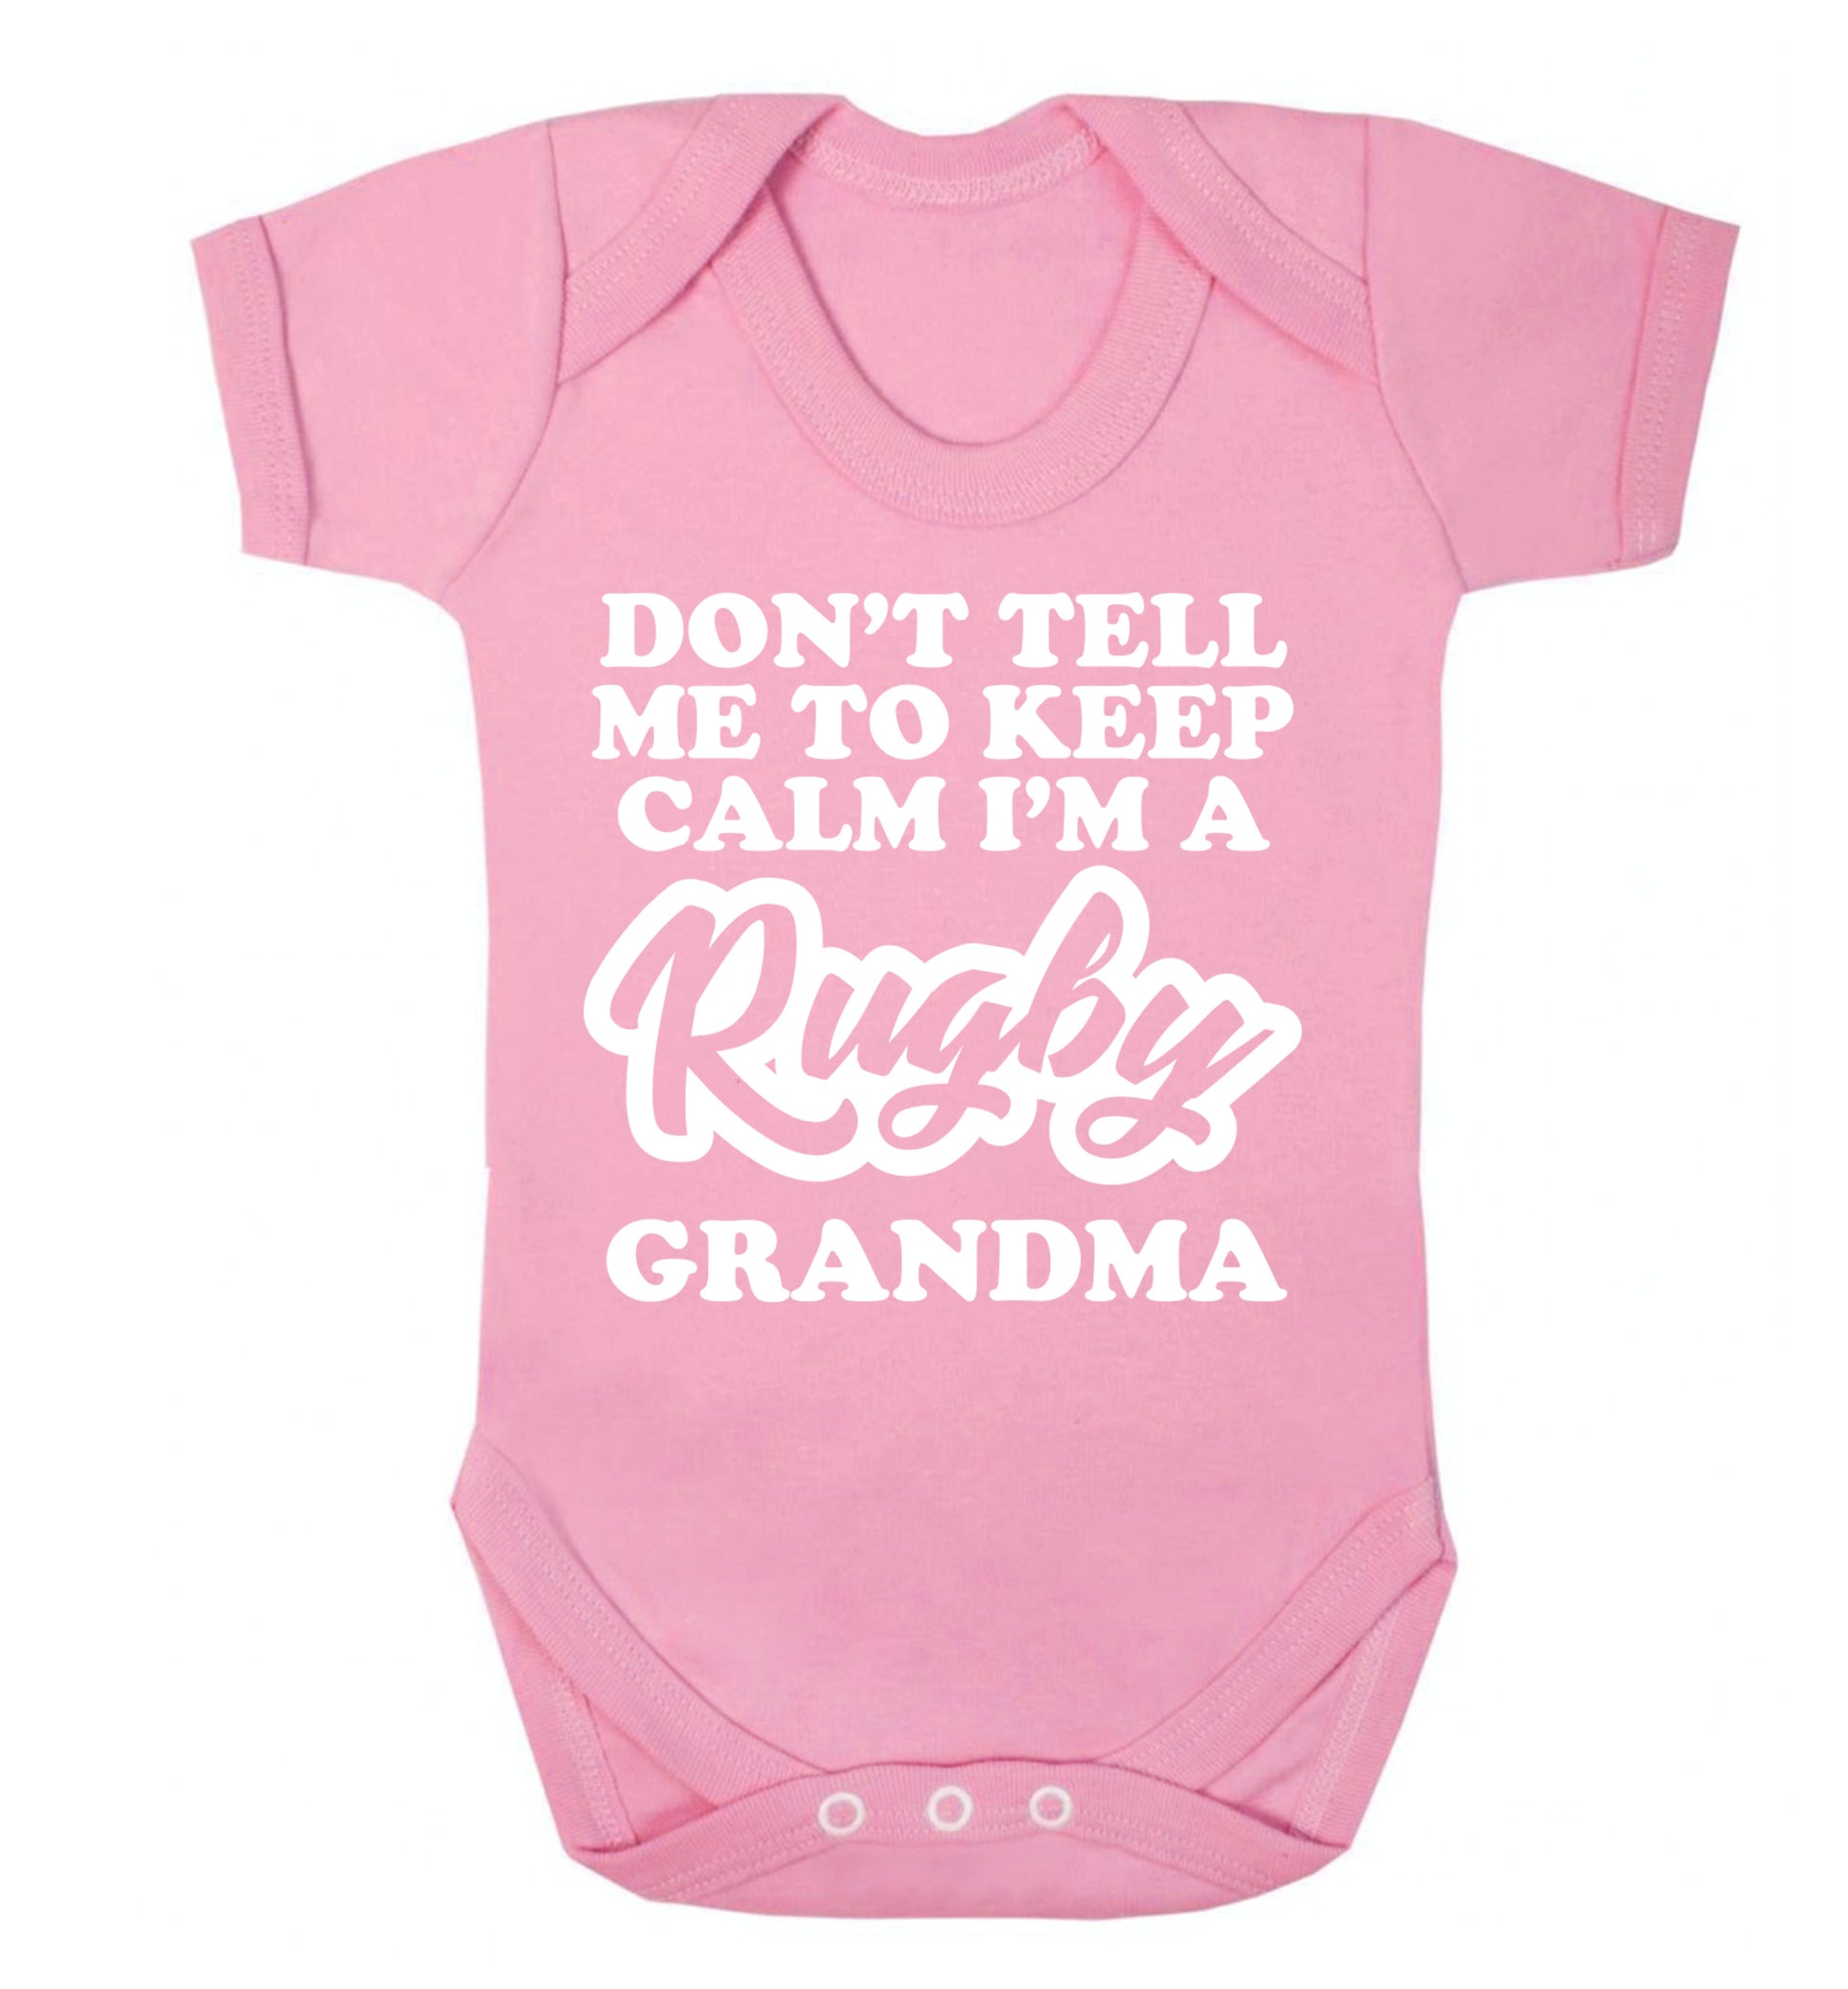 Don't tell me to keep calm I'm a rugby grandma Baby Vest pale pink 18-24 months